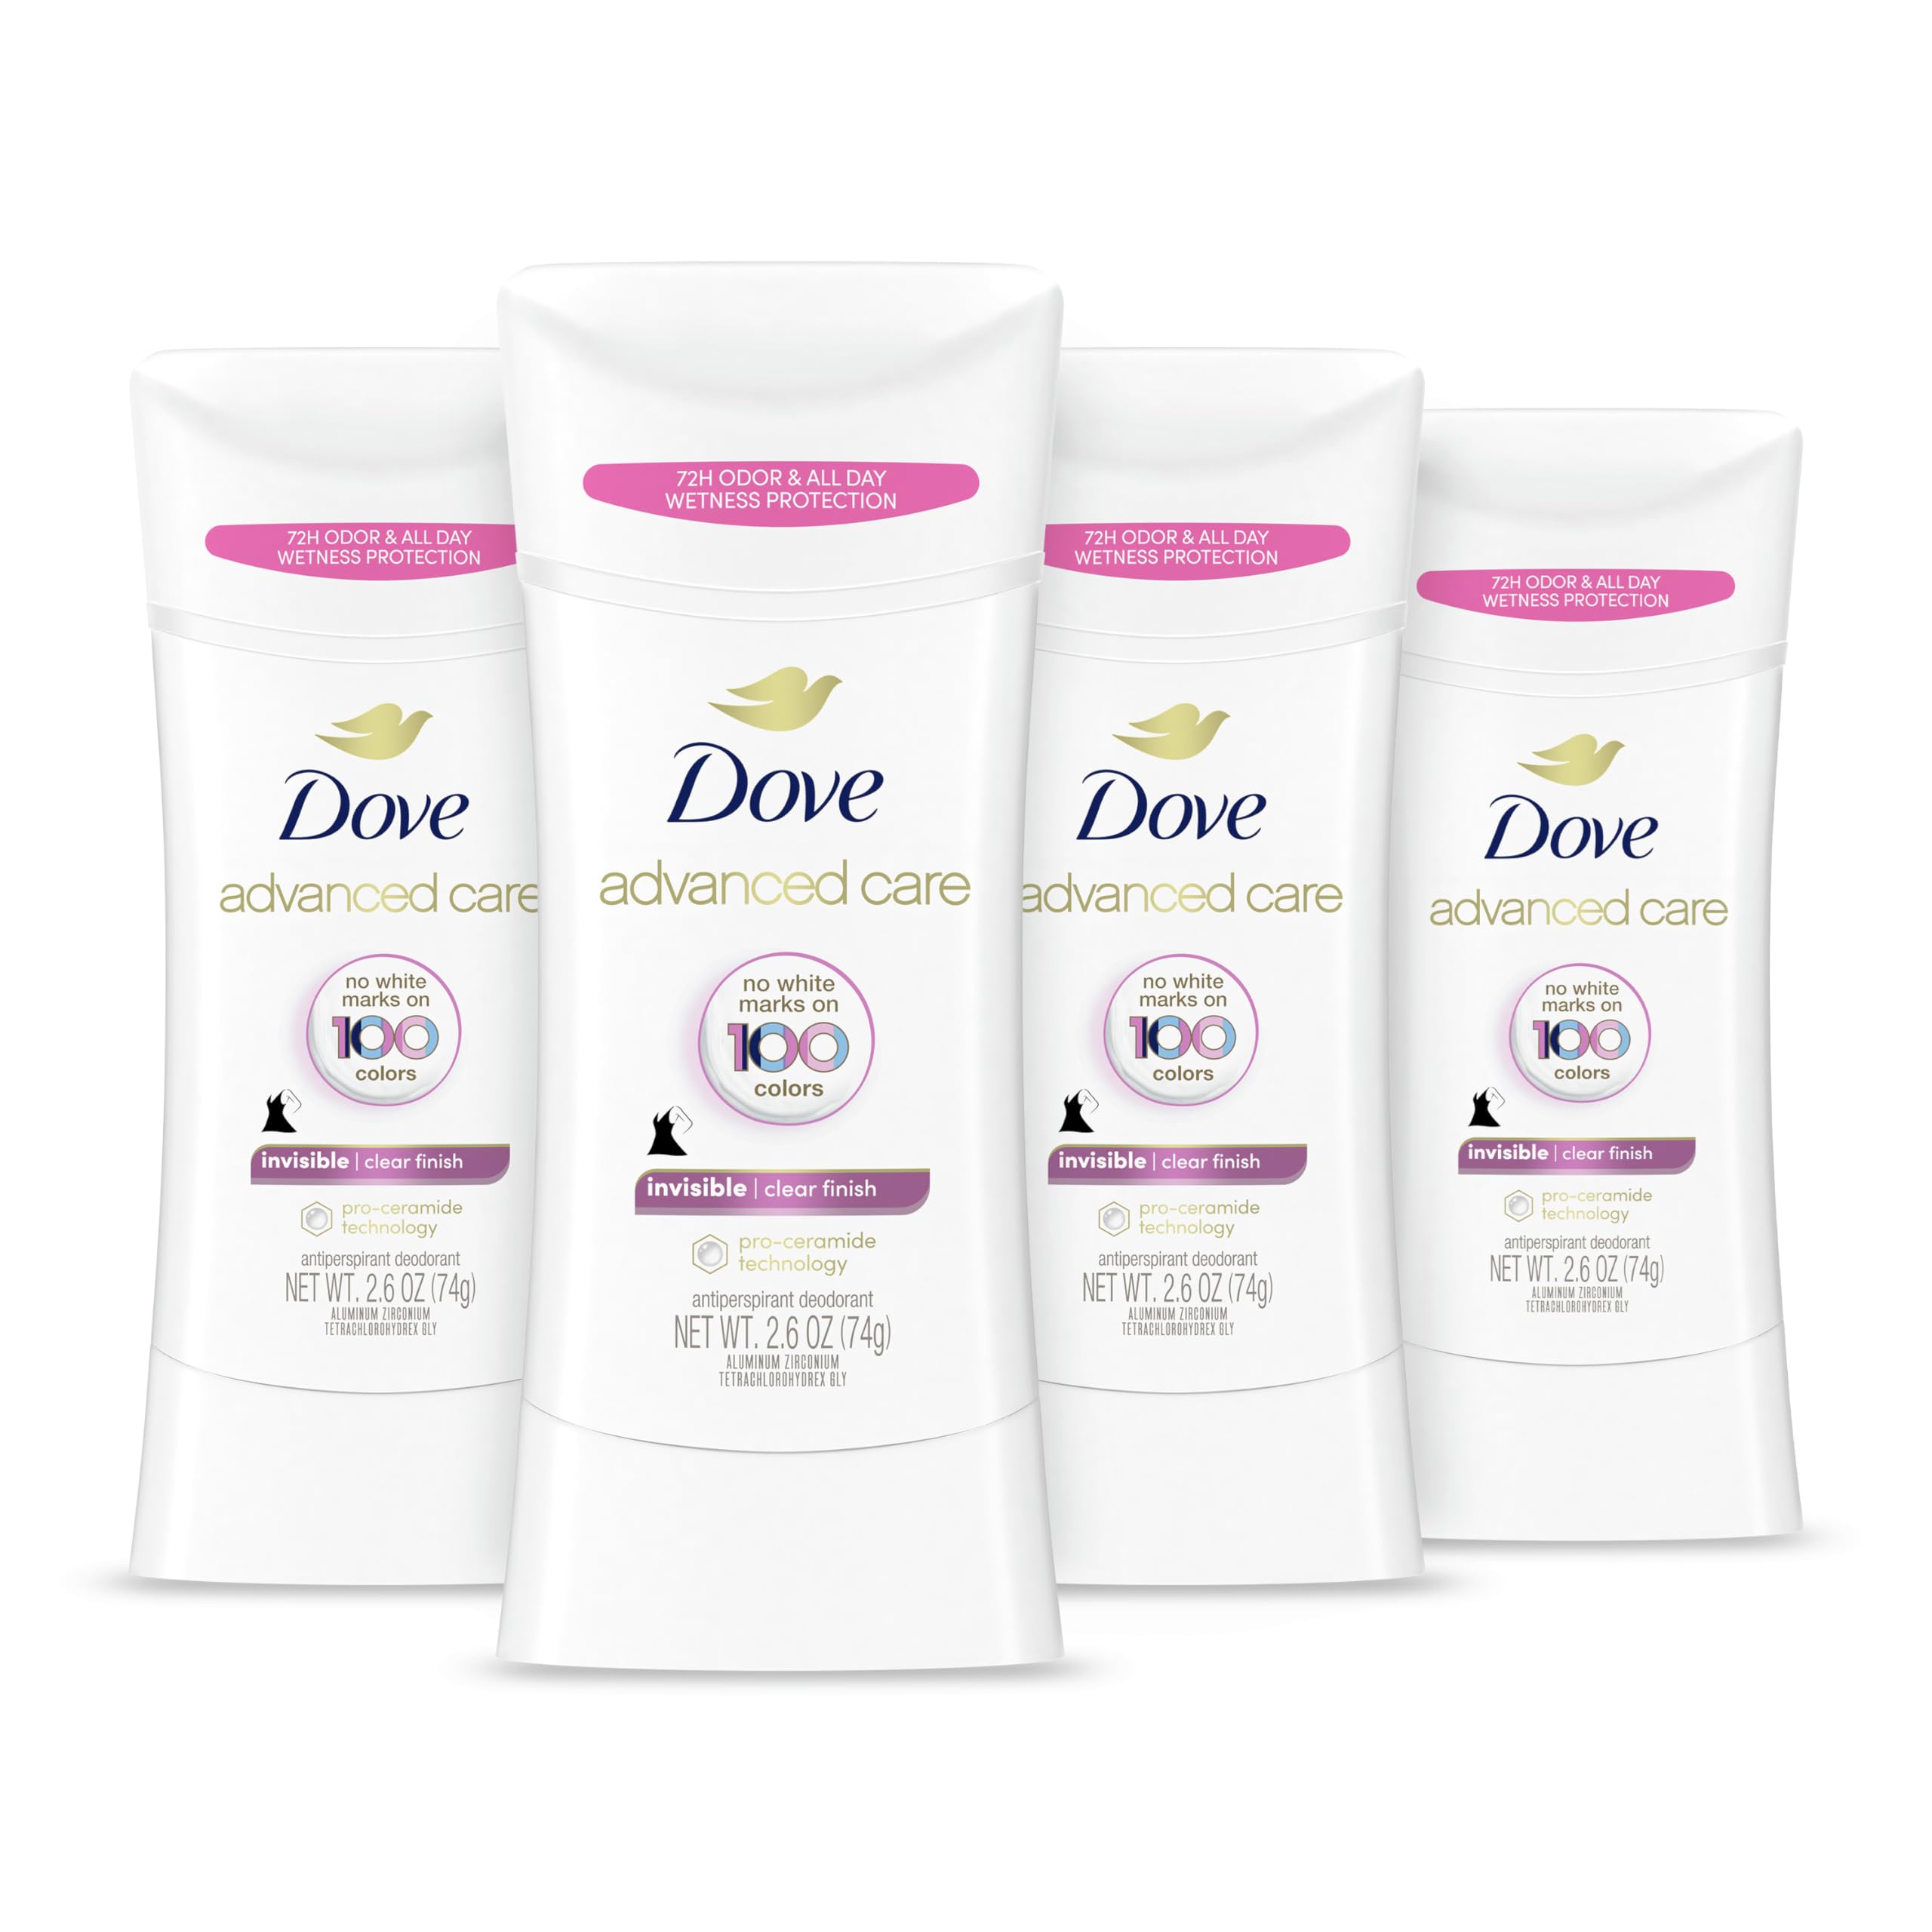 4-Pack 2.6-Oz Dove Advanced Care Antiperspirant Deodorant Stick (Clear Finish) $12.12 w/ S&S + Free Shipping w/ Prime or on $35+ $12.13